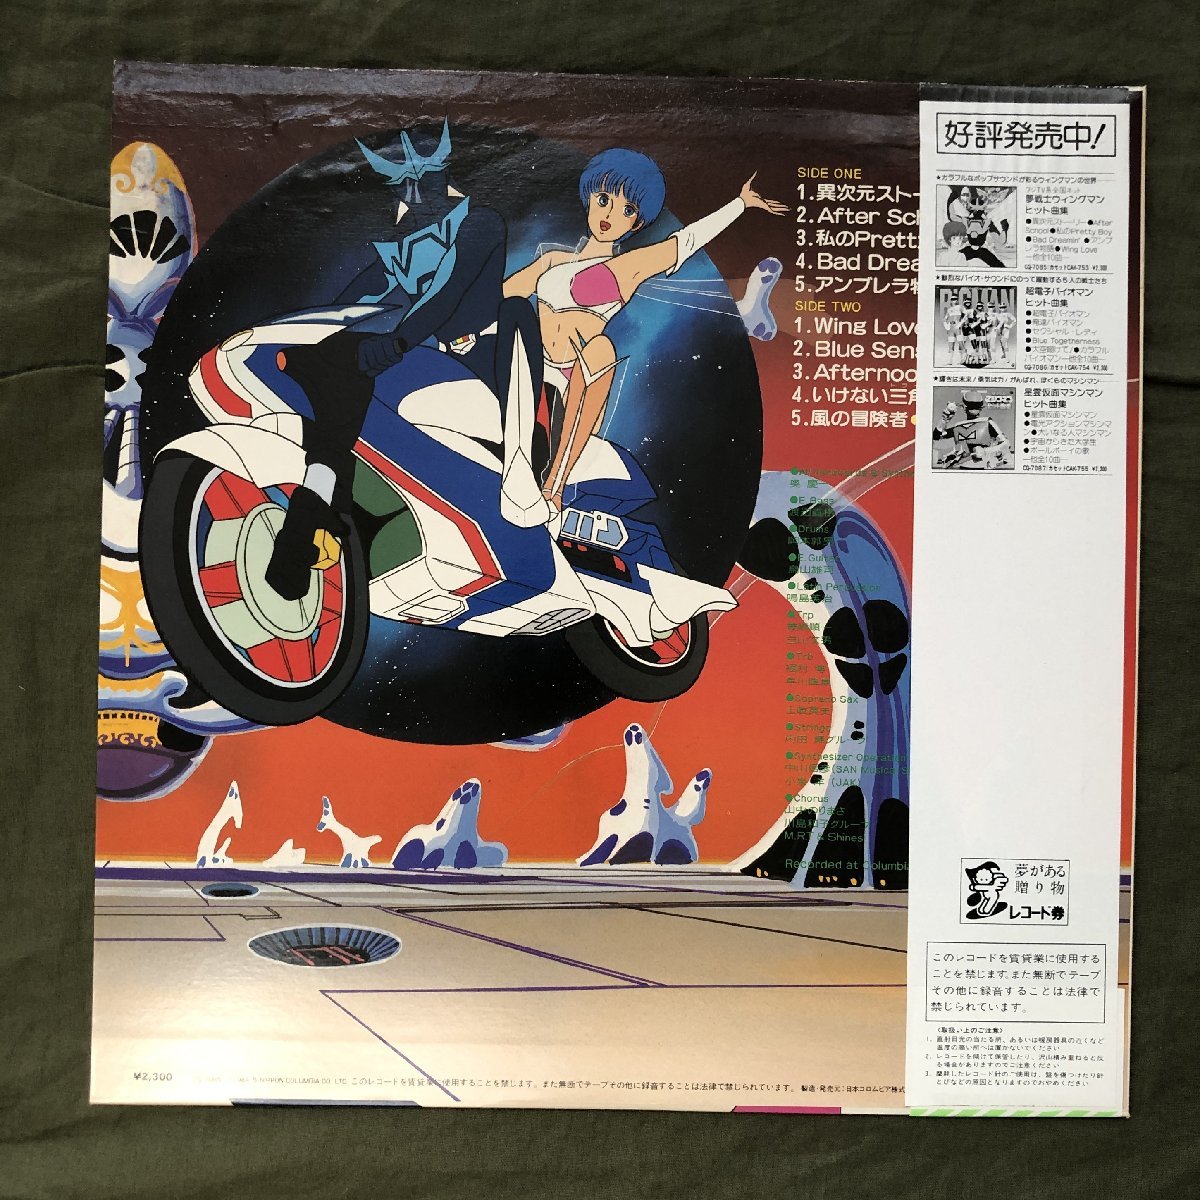  good record 1984 year original Release record dream warrior wing man LP record hit collection with belt anime manga po pra mountain inside .. paste mountain ....